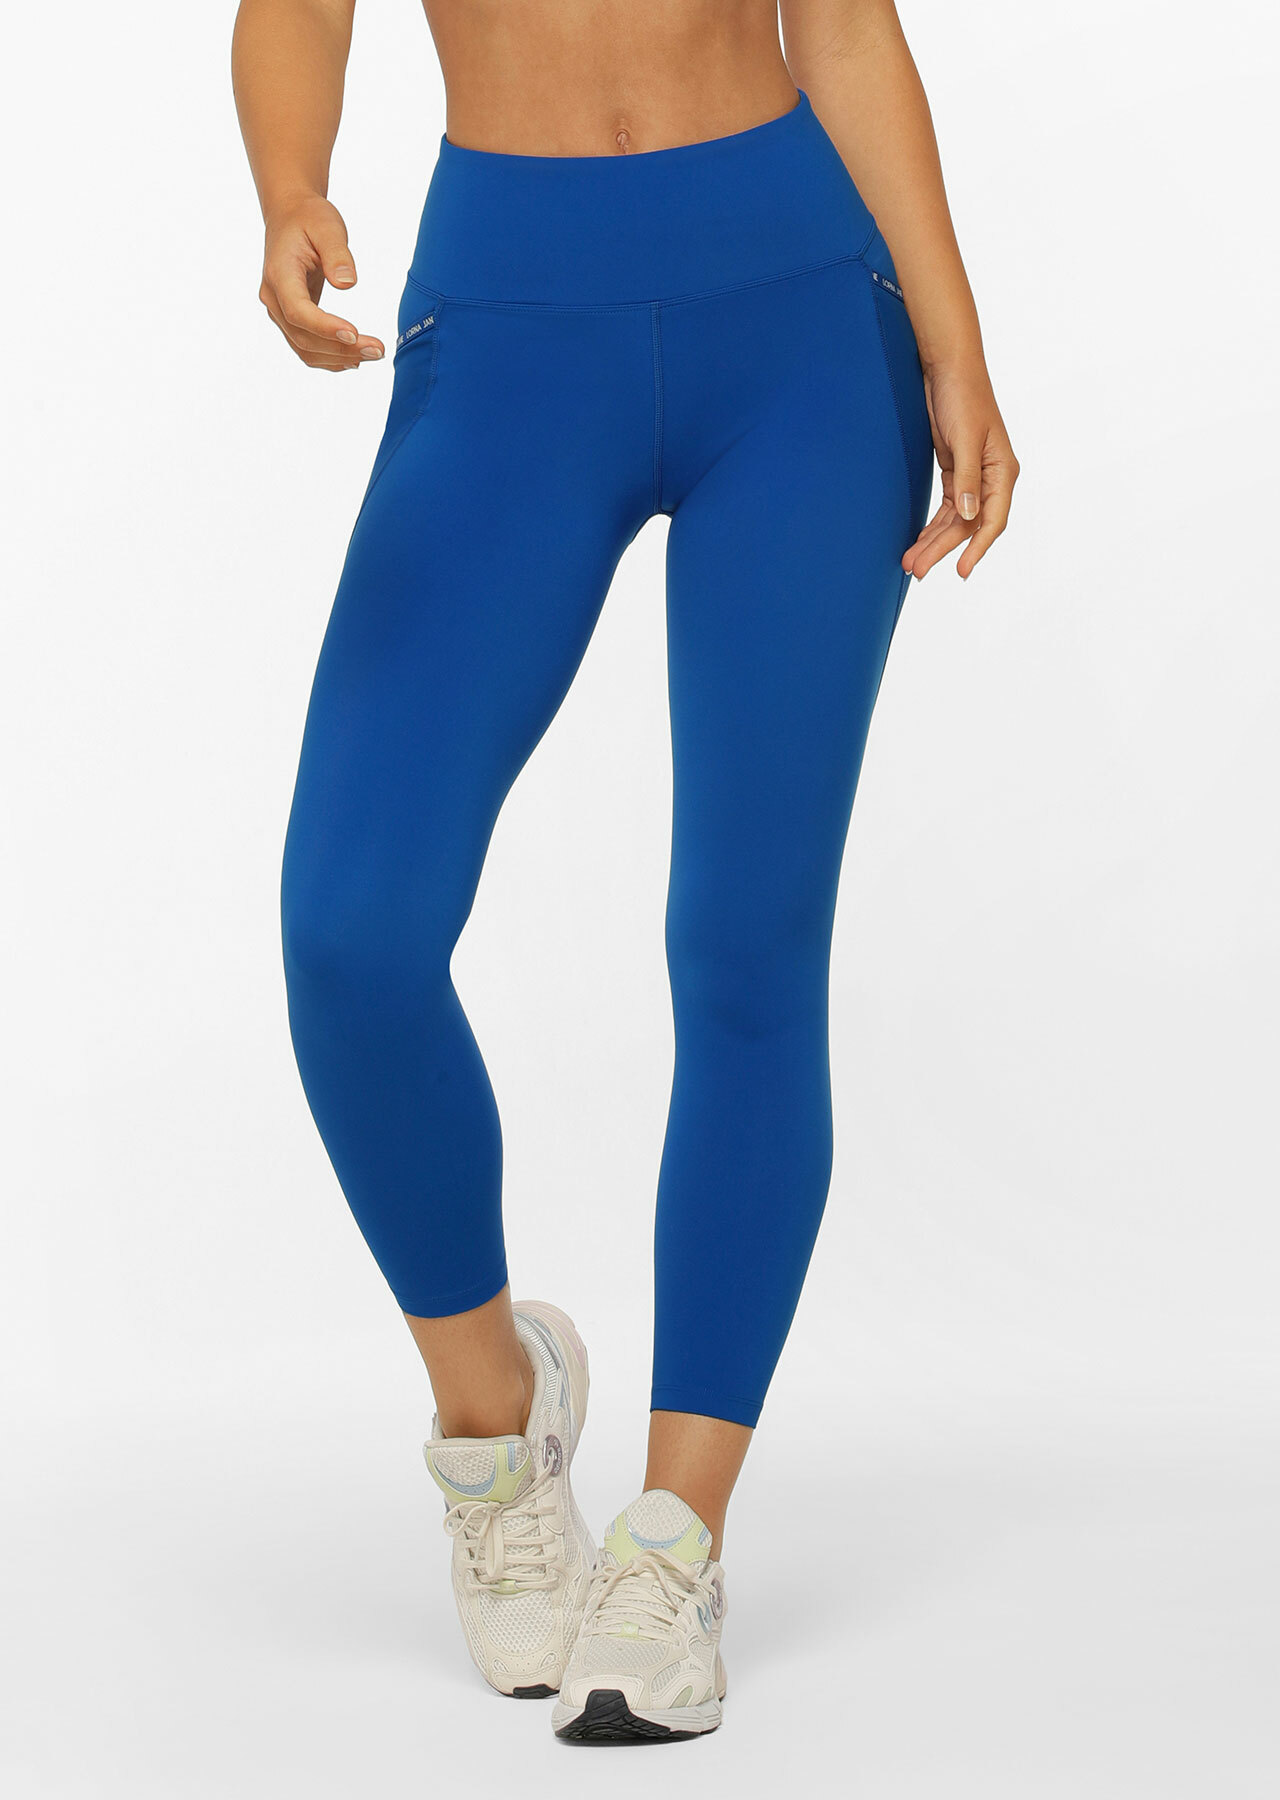 Curved Recycled Ankle Biter Leggings, Blue